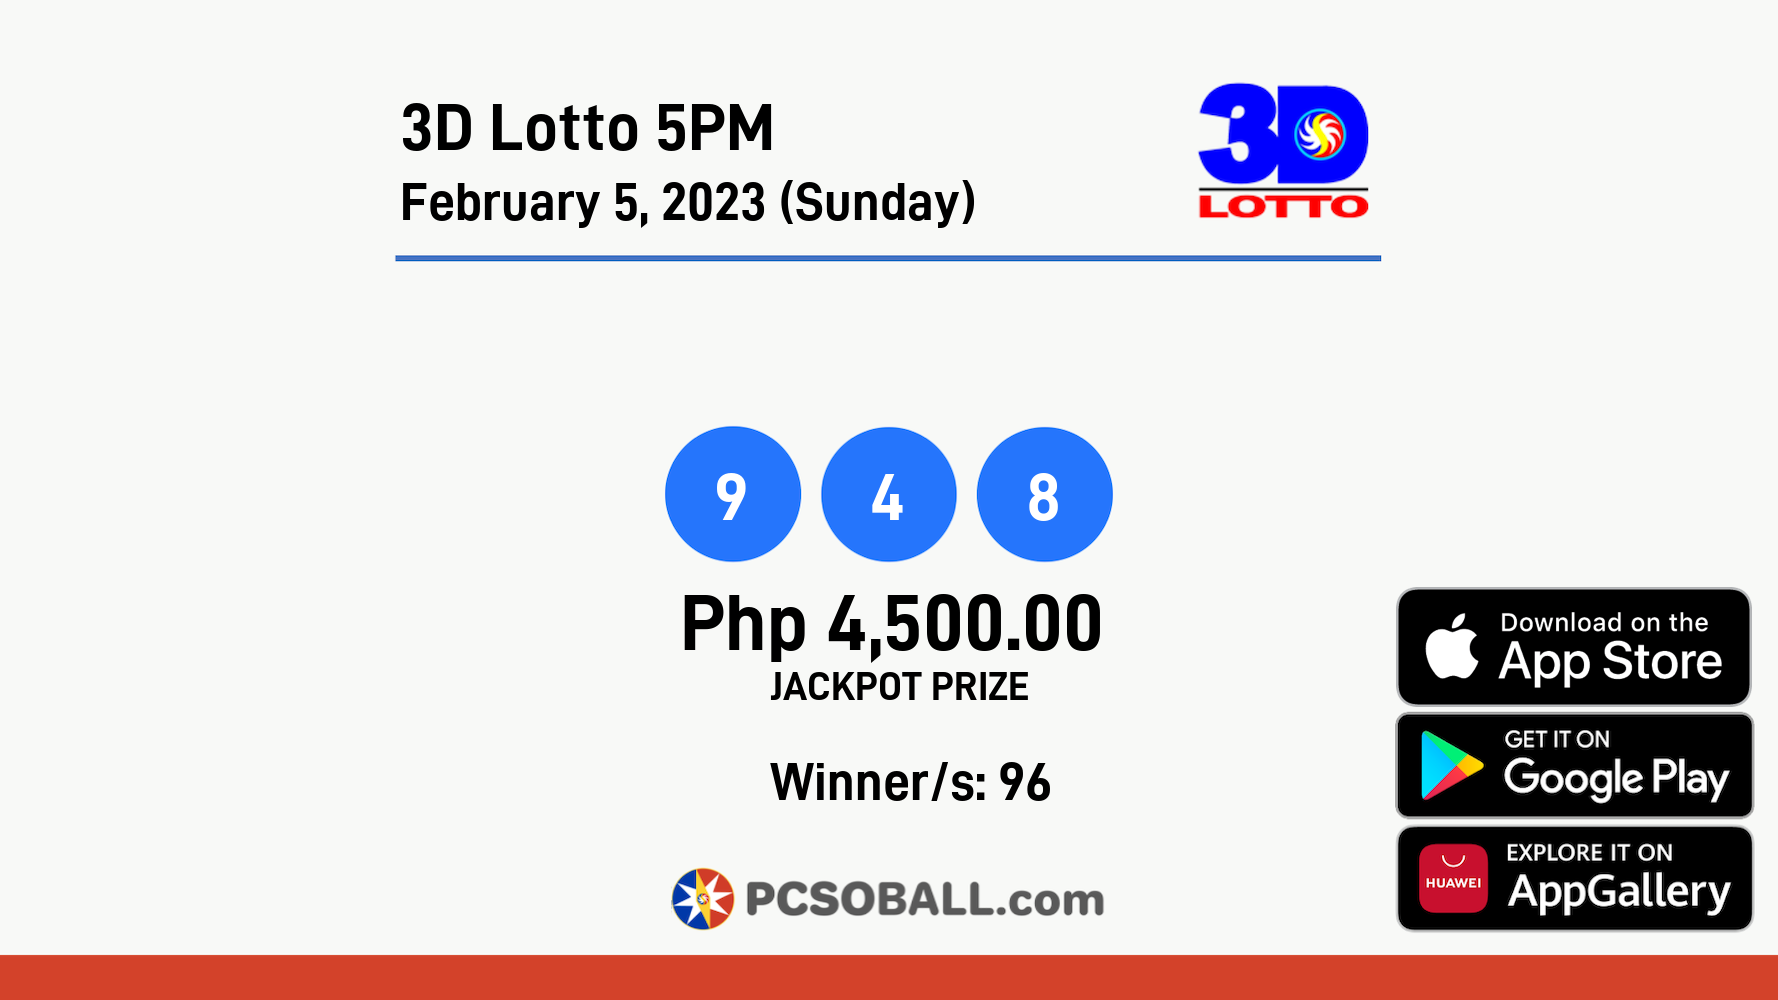 3D Lotto 5PM February 5, 2023 (Sunday) Result